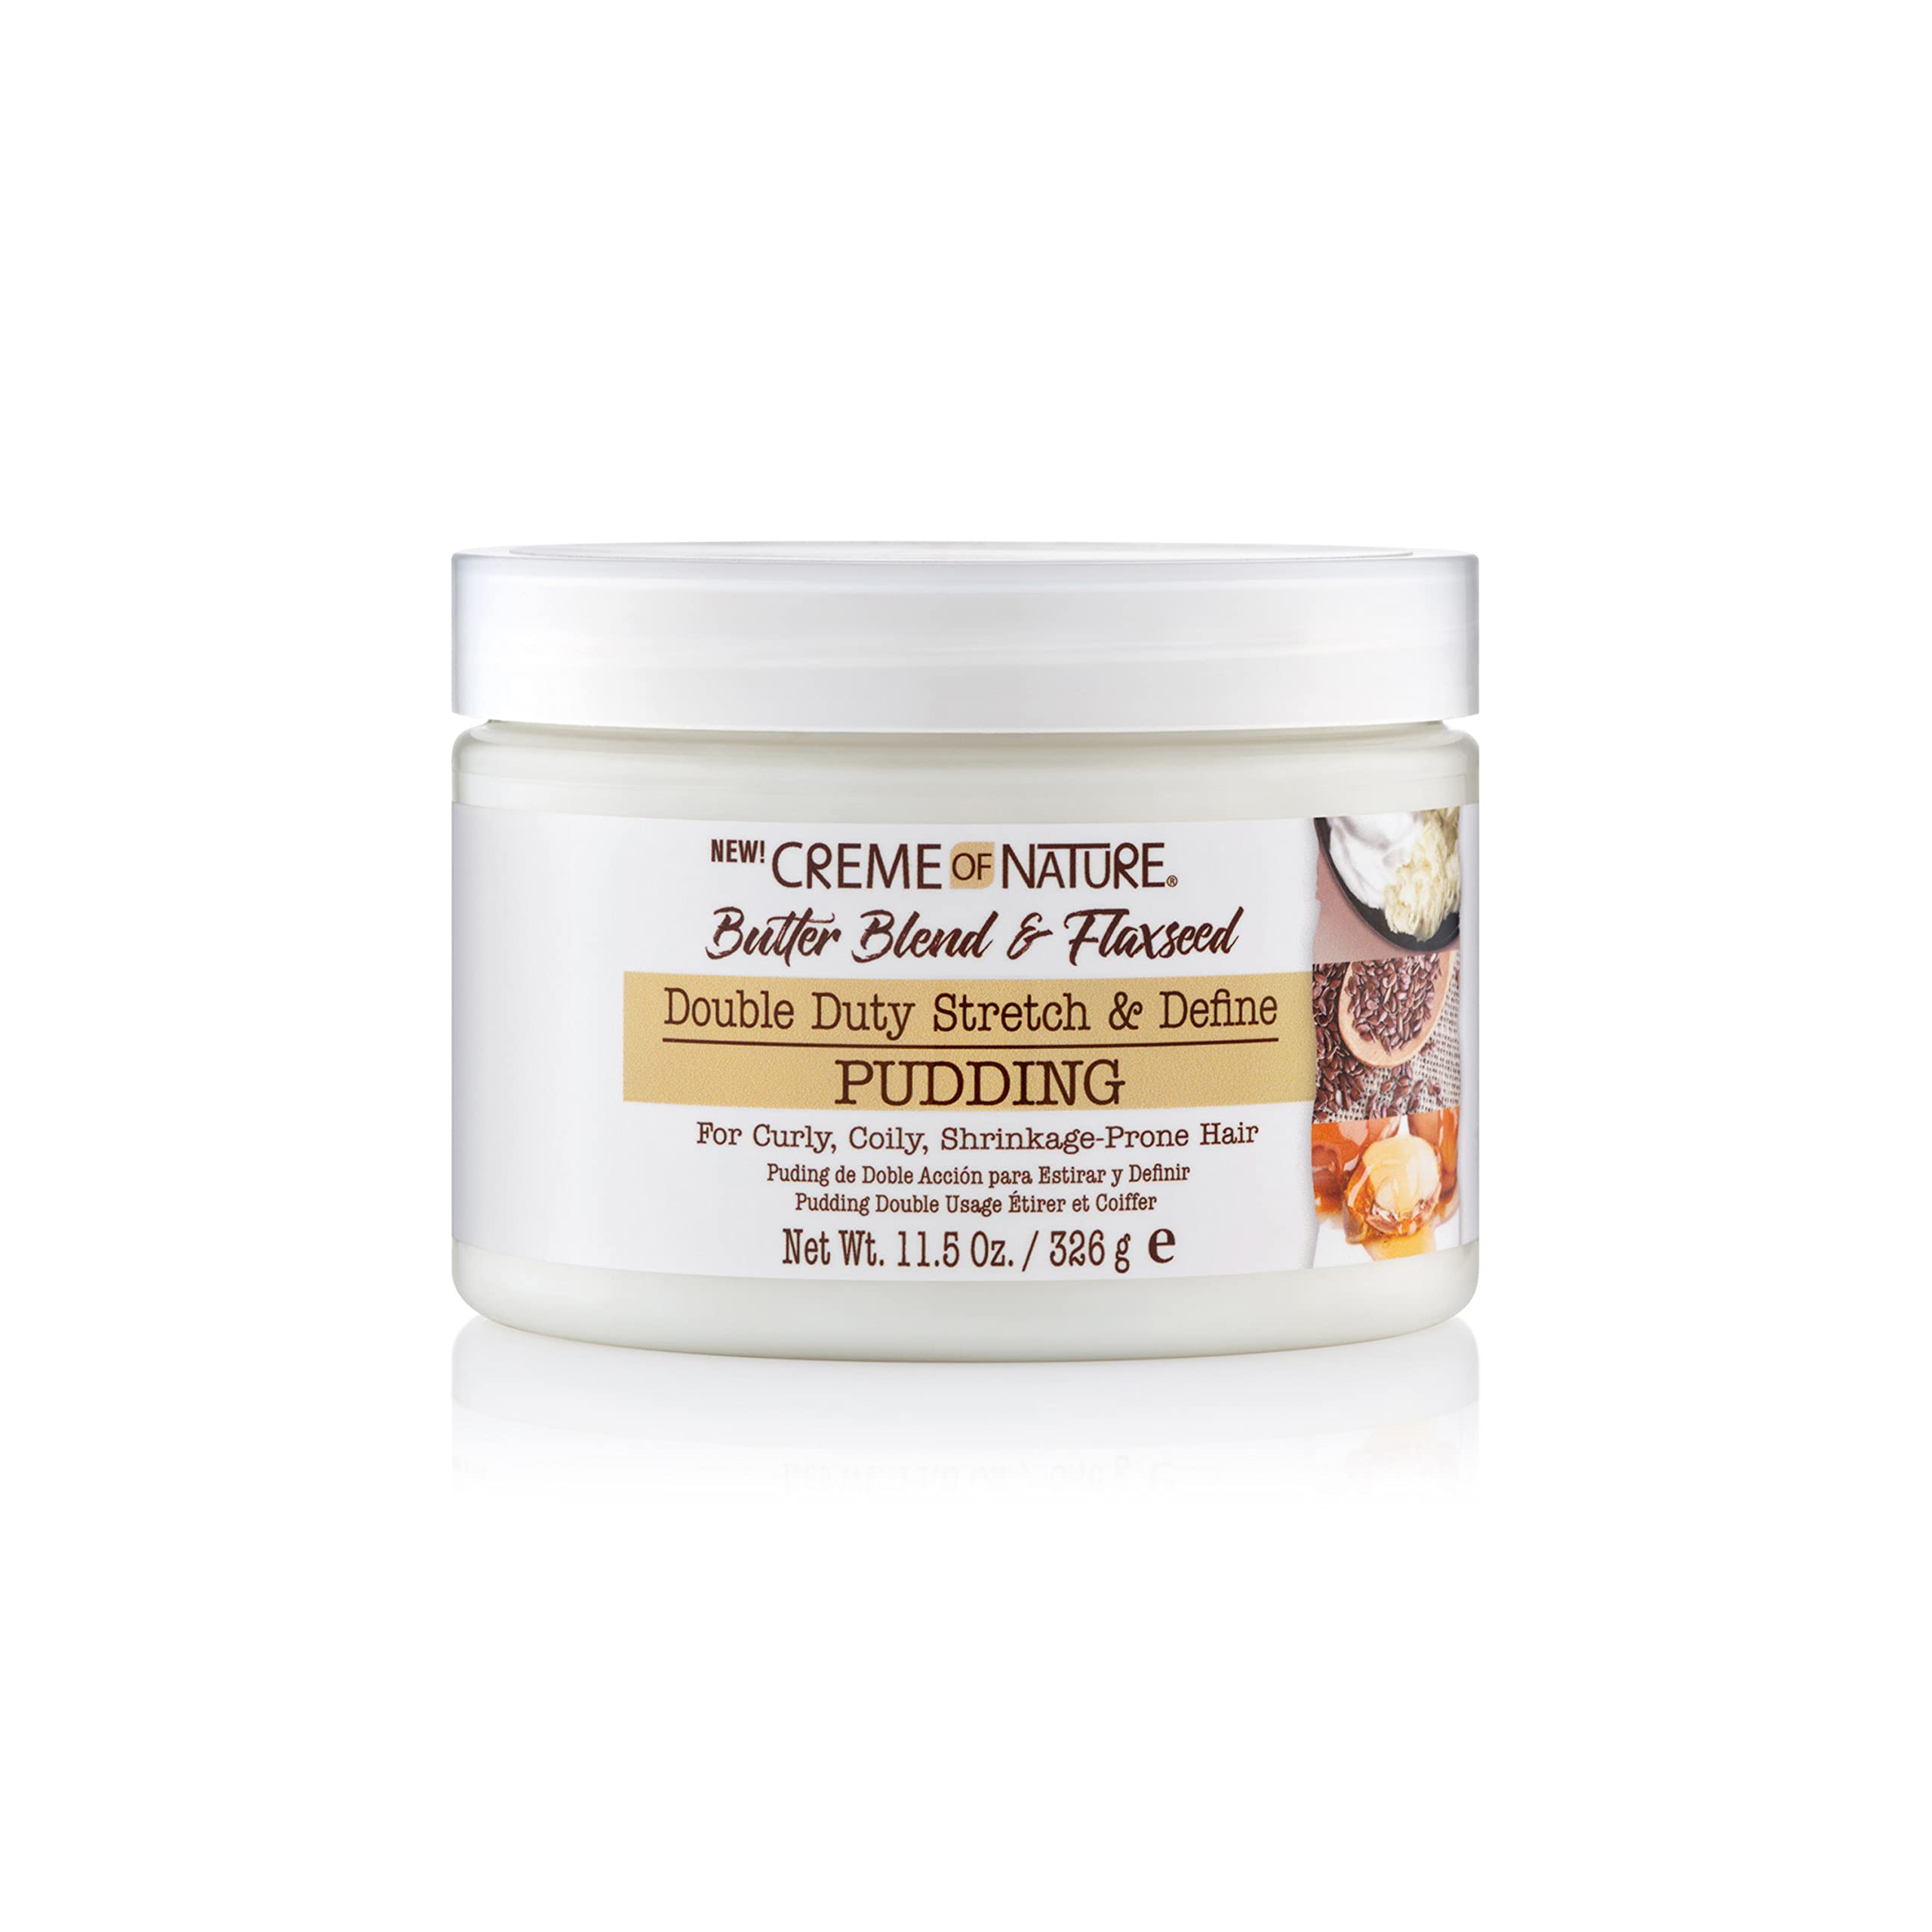 Curl Definition Pudding by Creme of Nature, Butter Blend, Argan Oil, Flaxseed Oil, Anti Frizz, 11.5 Oz